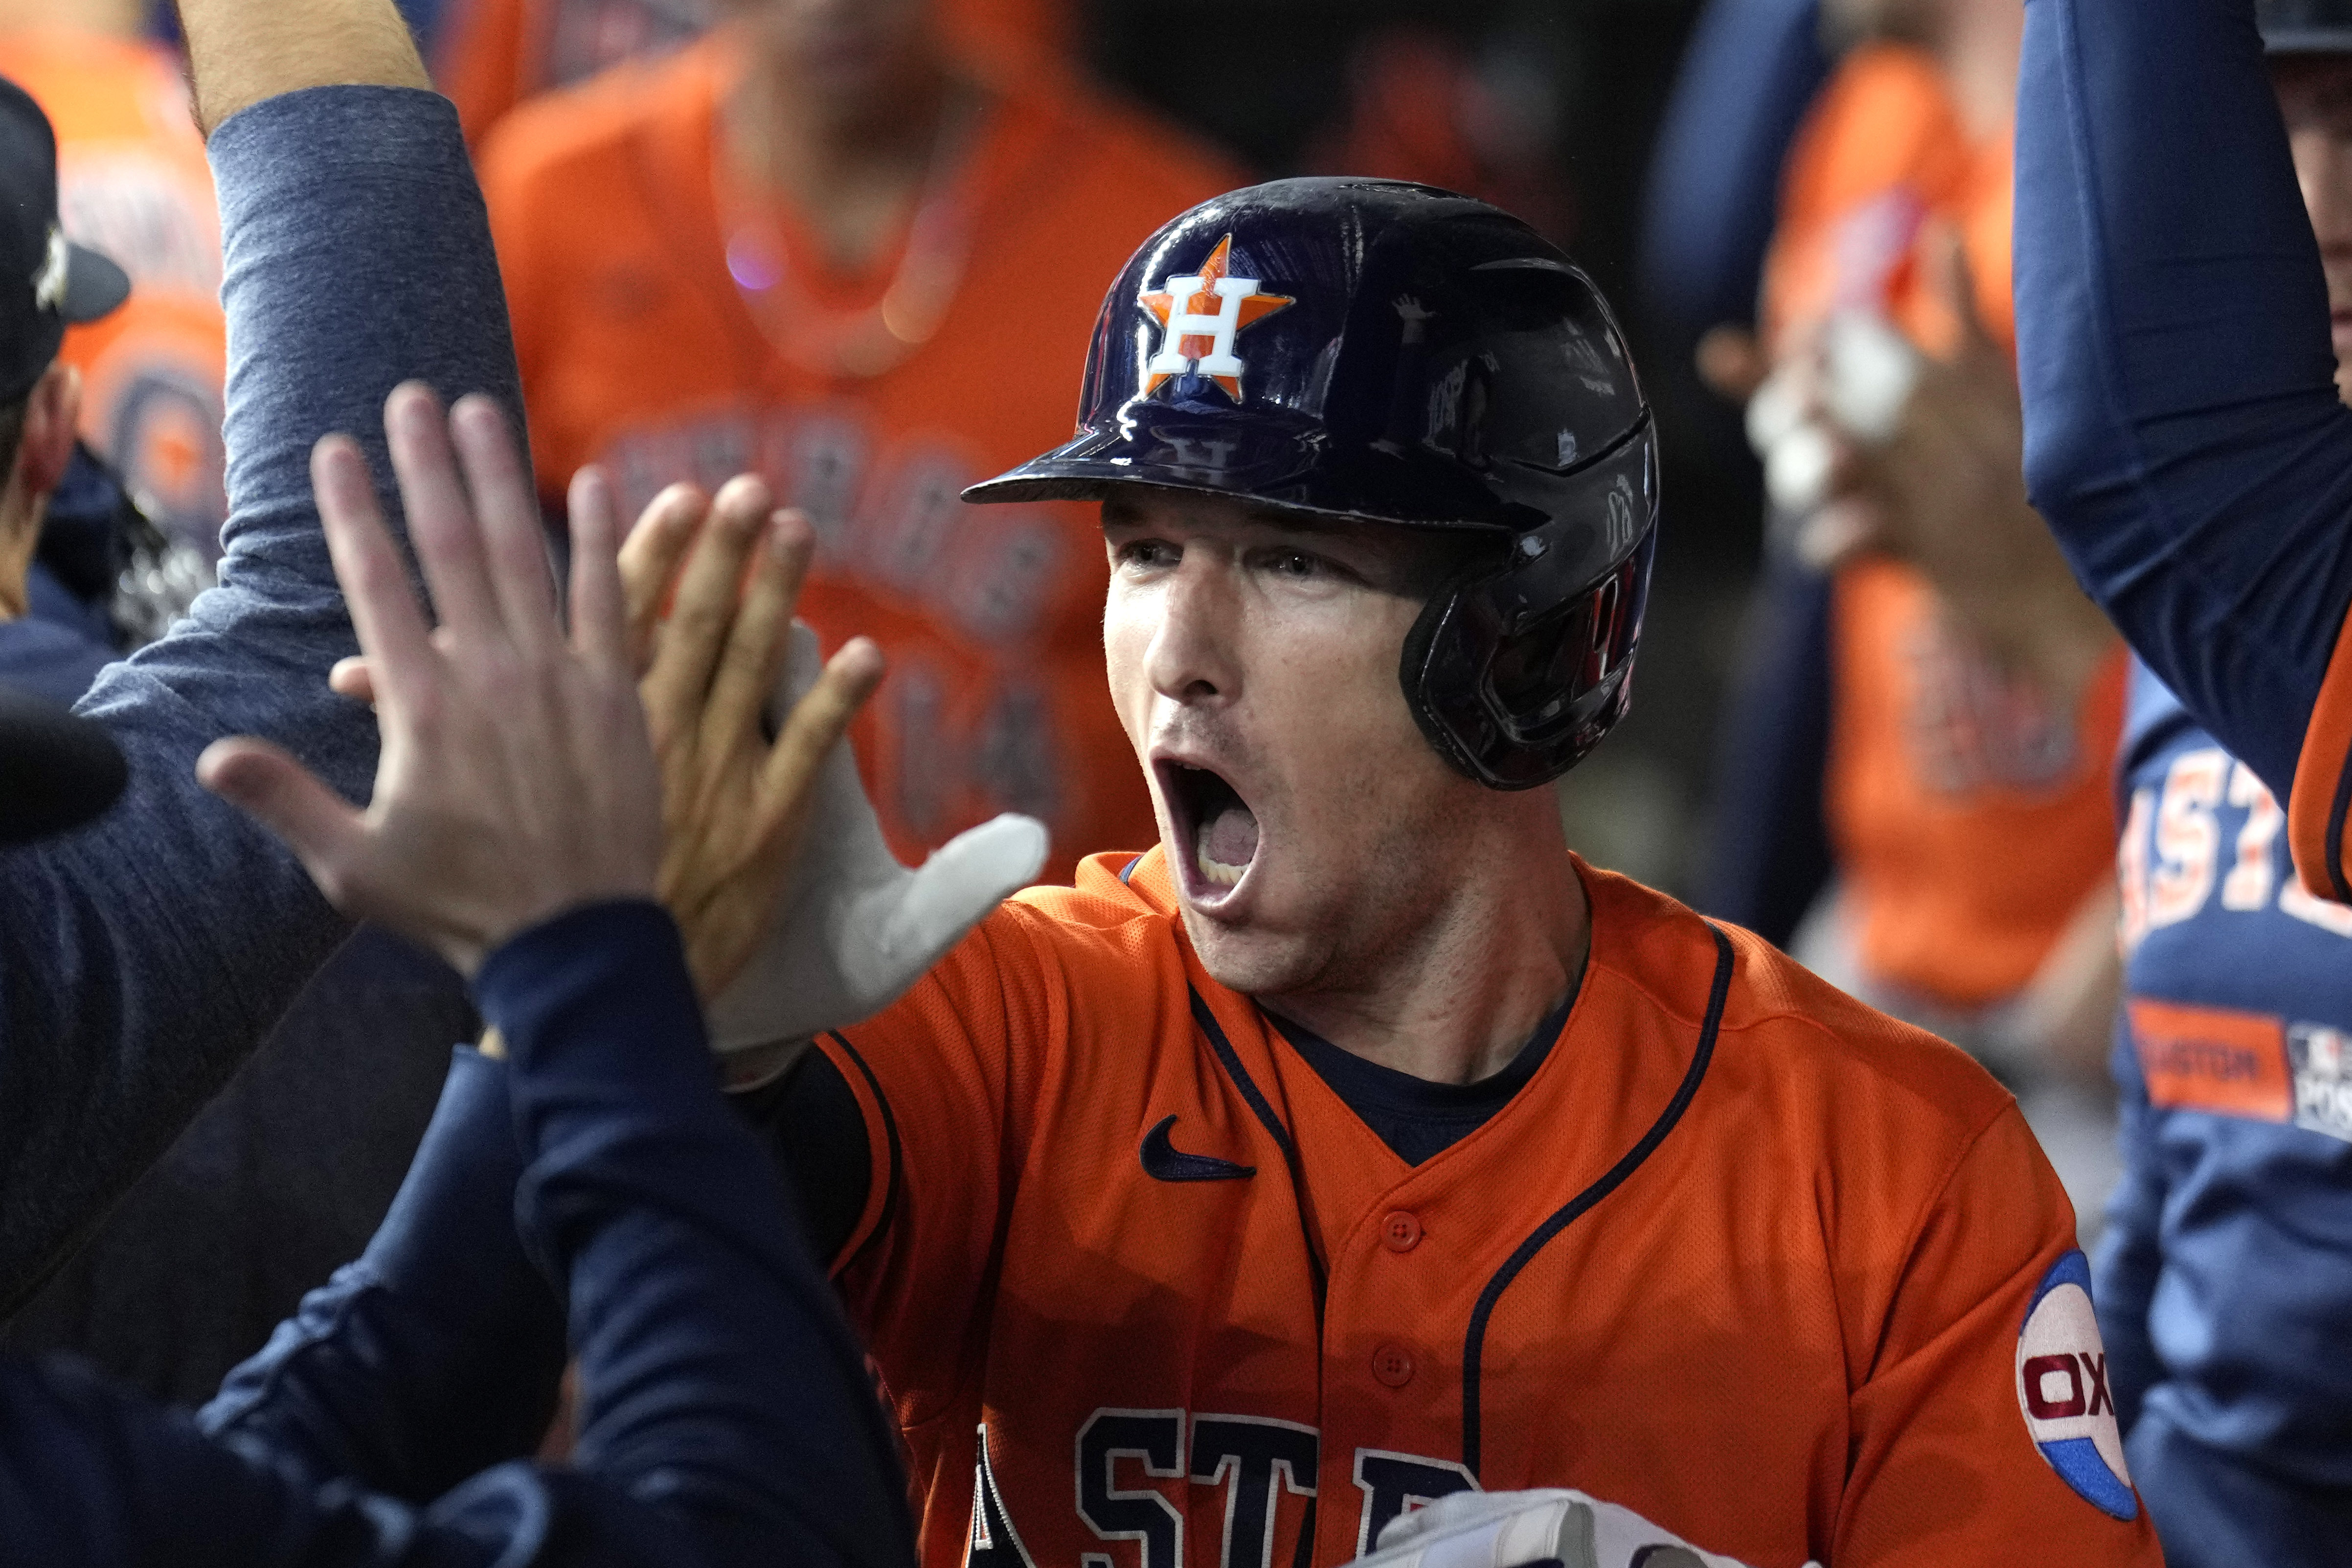 An Irate Alex Bregman Gets Even With Nats, Pulls Off the Swaggiest